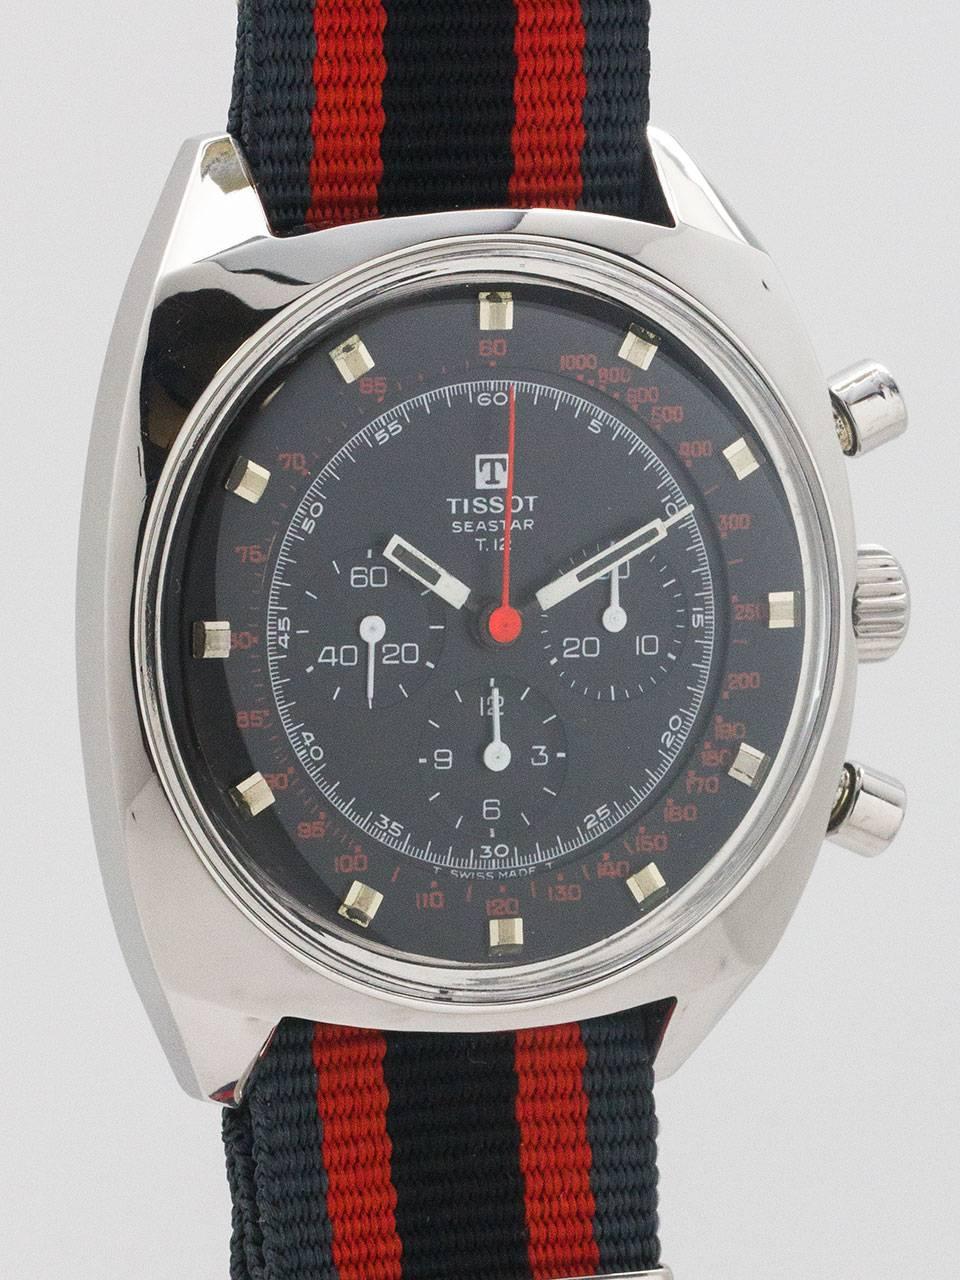 Tissot Stainless Steel Seastar T-12 Chronograph Wristwatch circa 1970’s. Featuring large 40 x 48mm cushion shaped case with contoured rounded angles and dome acrylic crystal. A great looking original black dial with recessed registers, with white